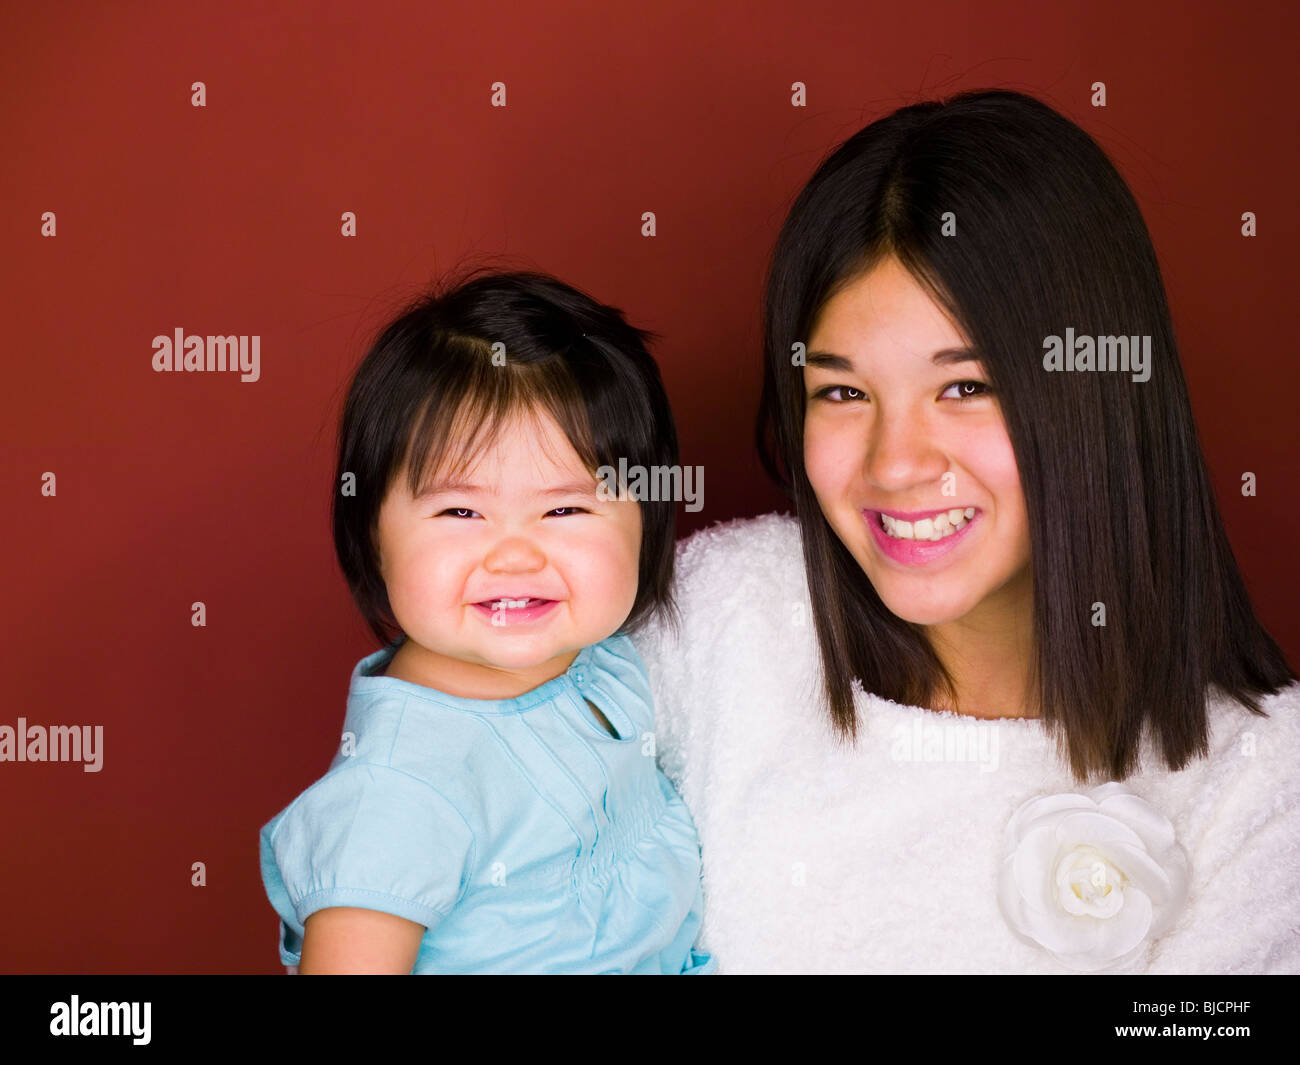 Sisters smiling Stock Photo